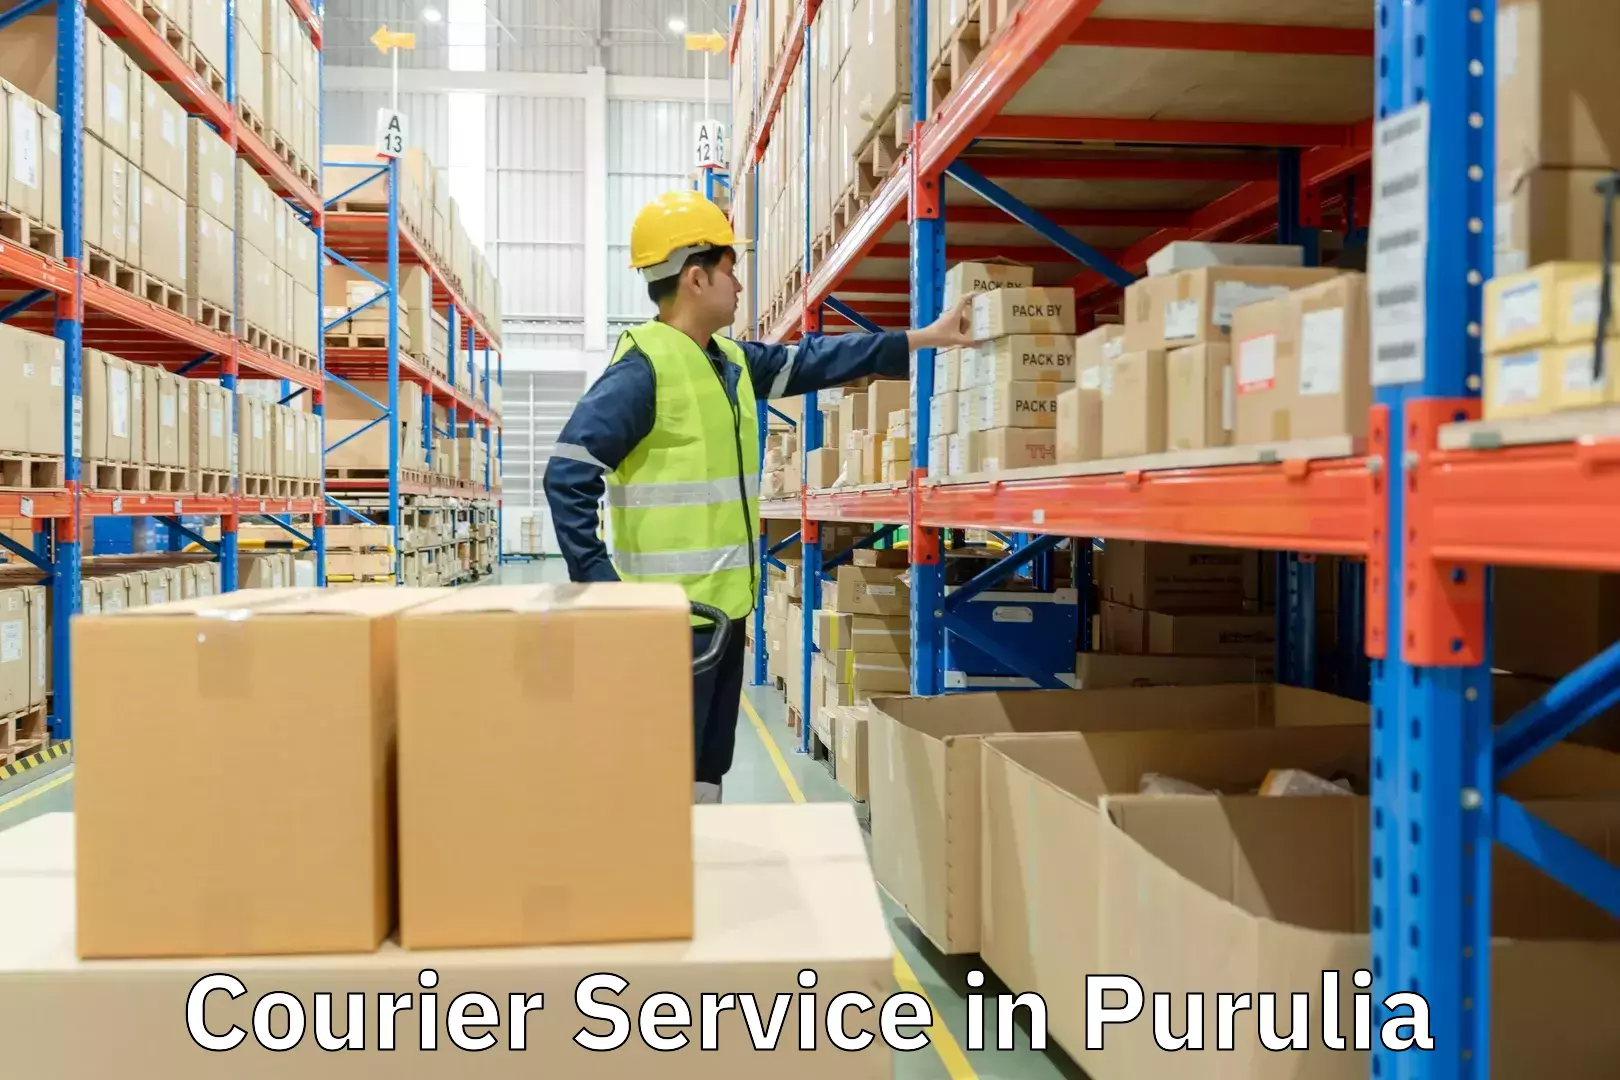 Online package tracking in Purulia